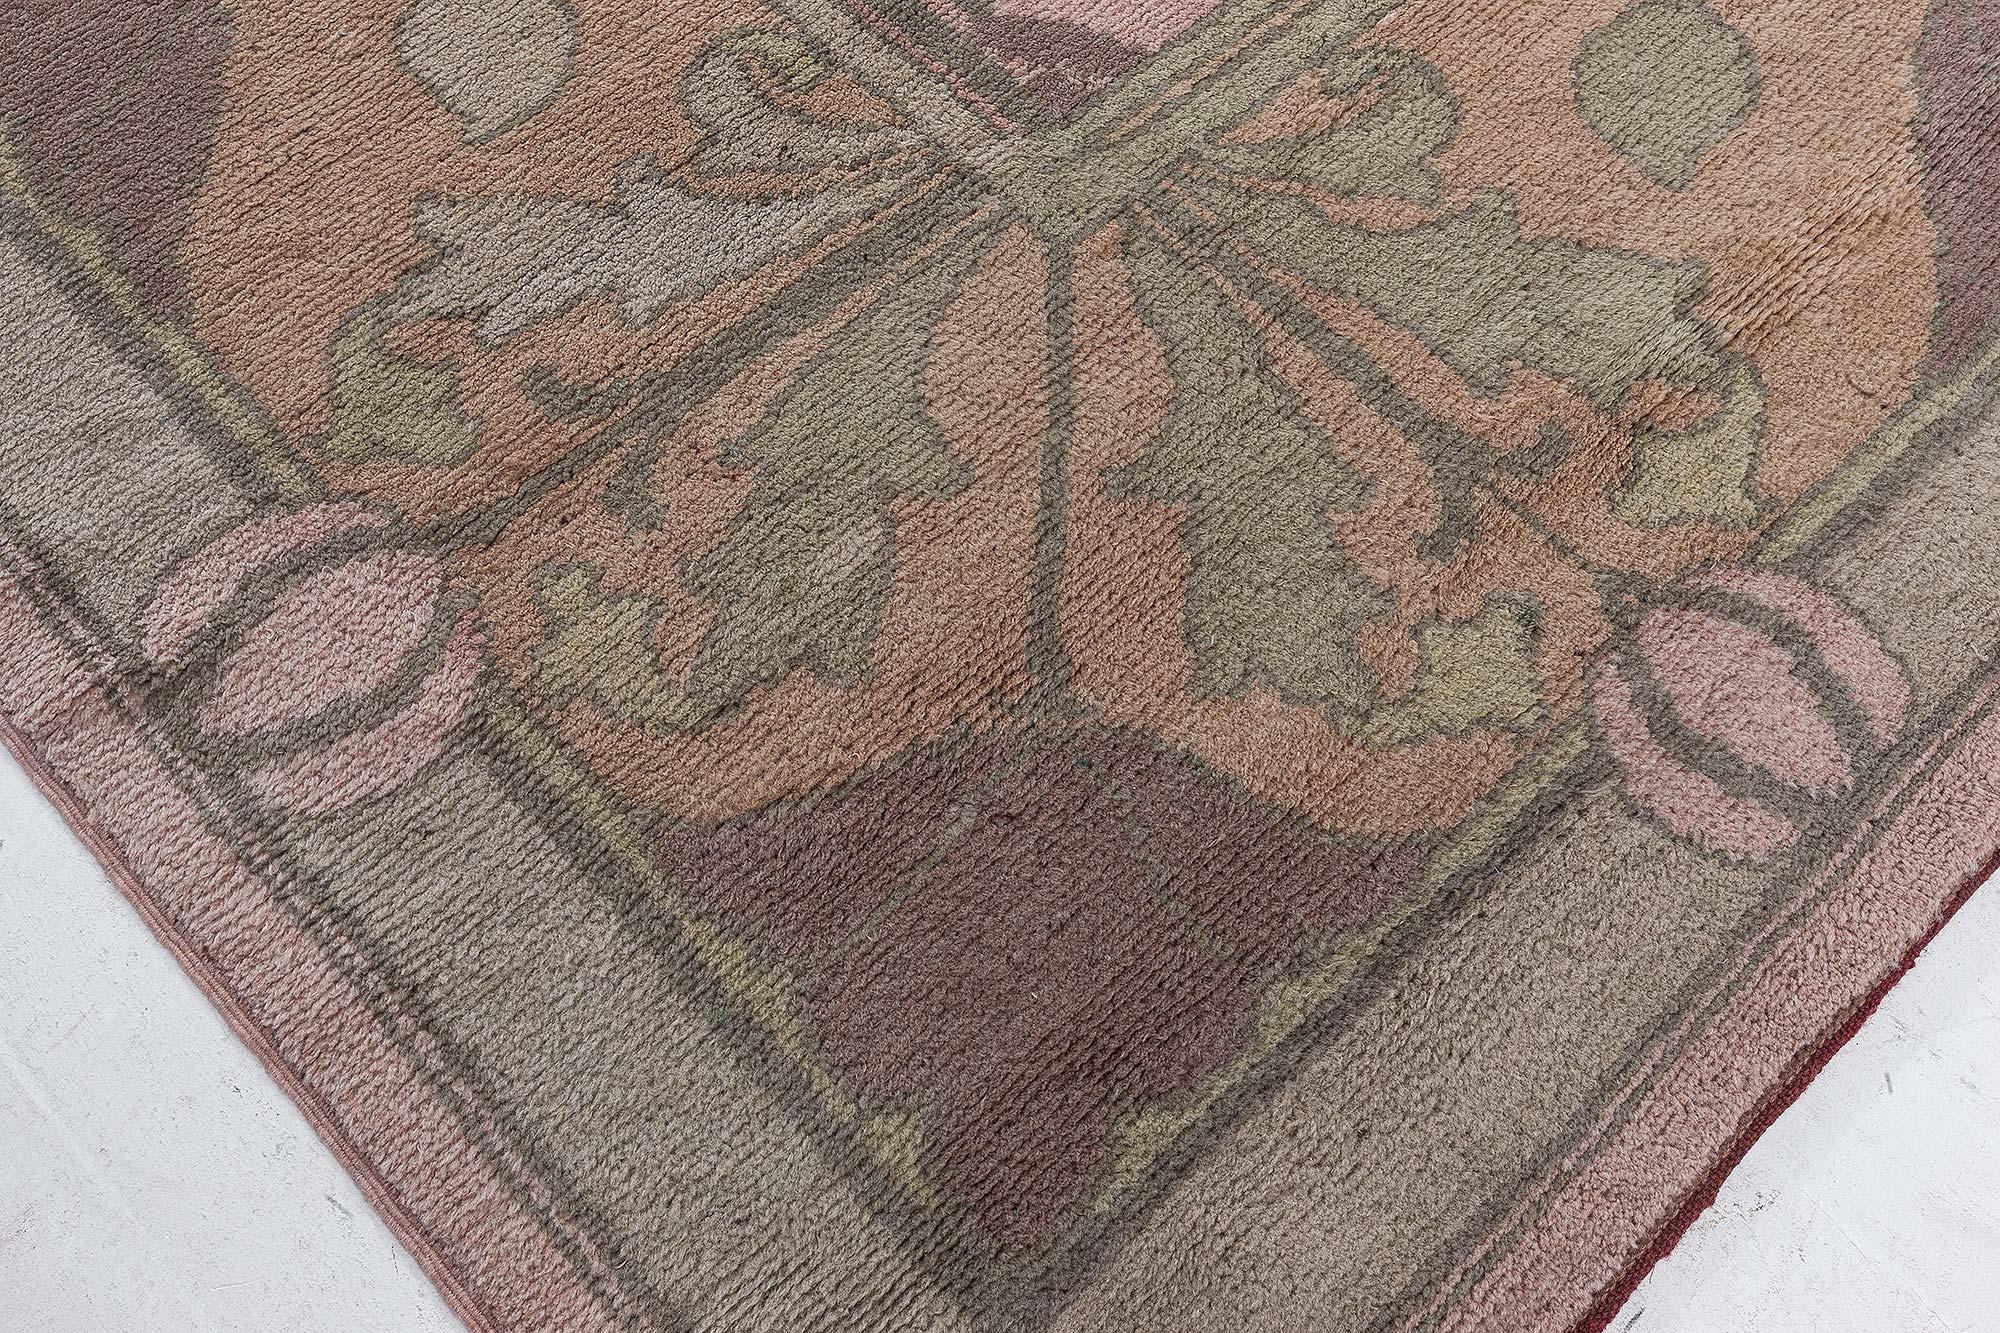 Tapis Arts and Crafts antique
Taille : 10'8